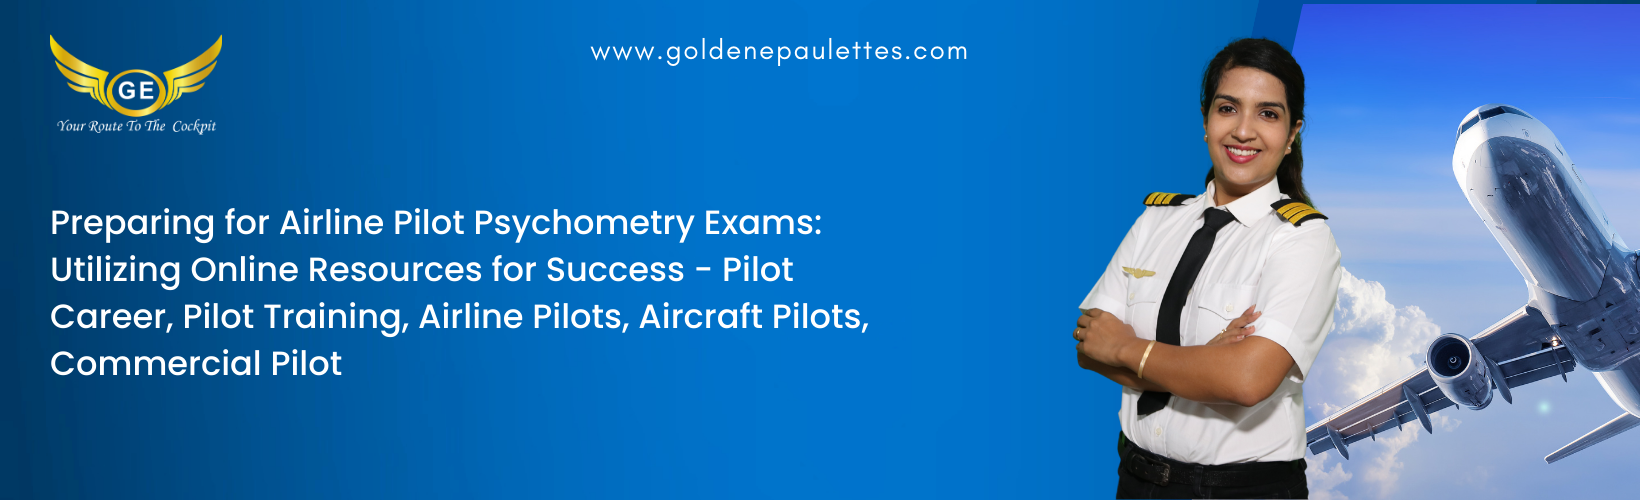 What to Expect During an Airline Pilot Psychometry Exam